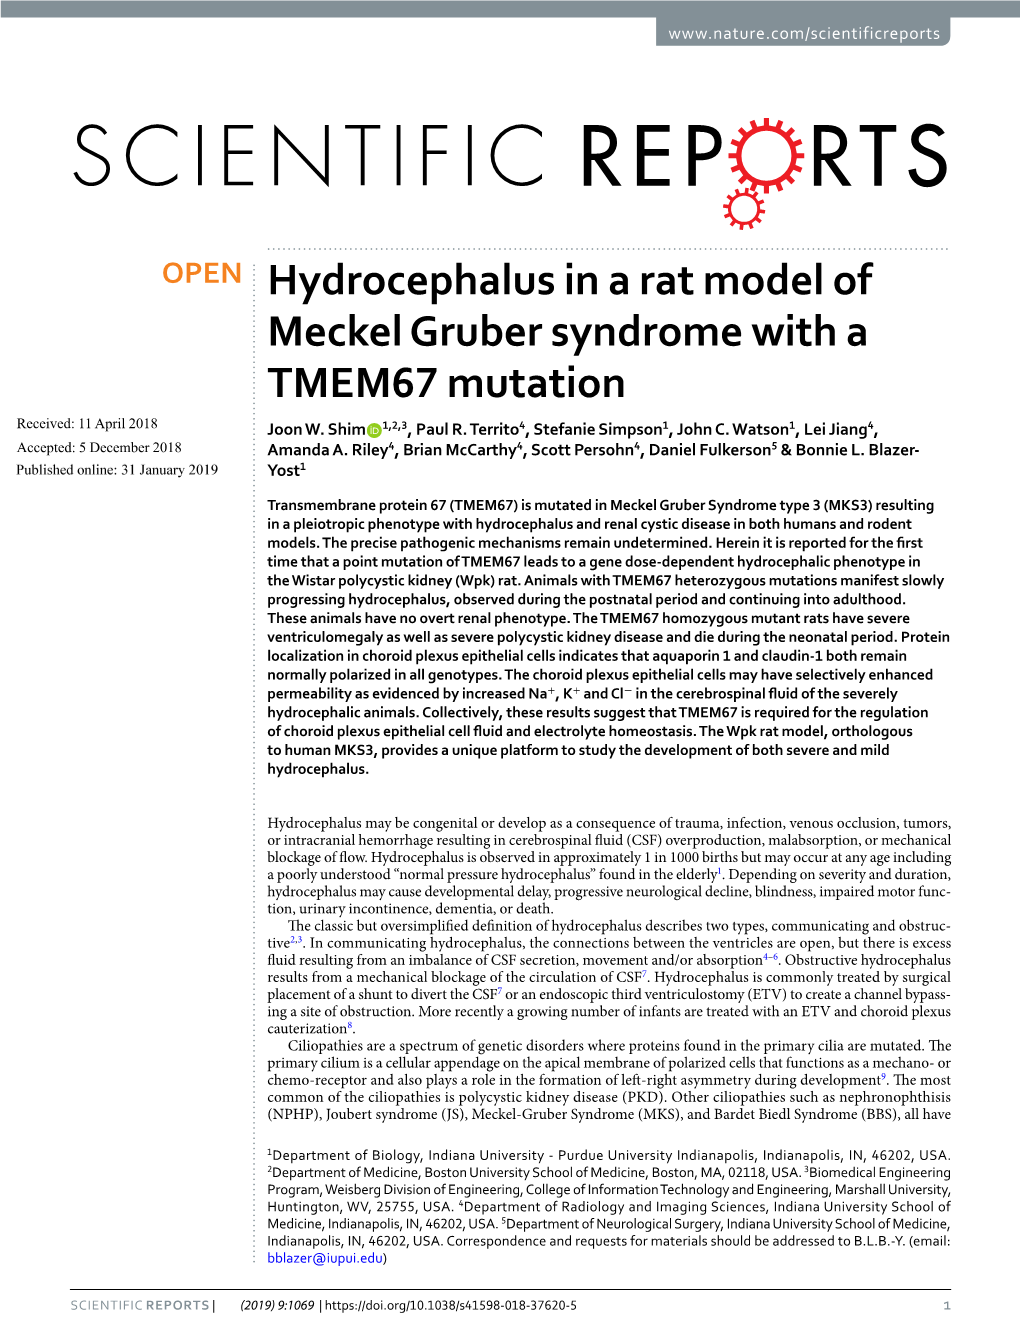 Hydrocephalus in a Rat Model of Meckel Gruber Syndrome with a TMEM67 Mutation Received: 11 April 2018 Joon W